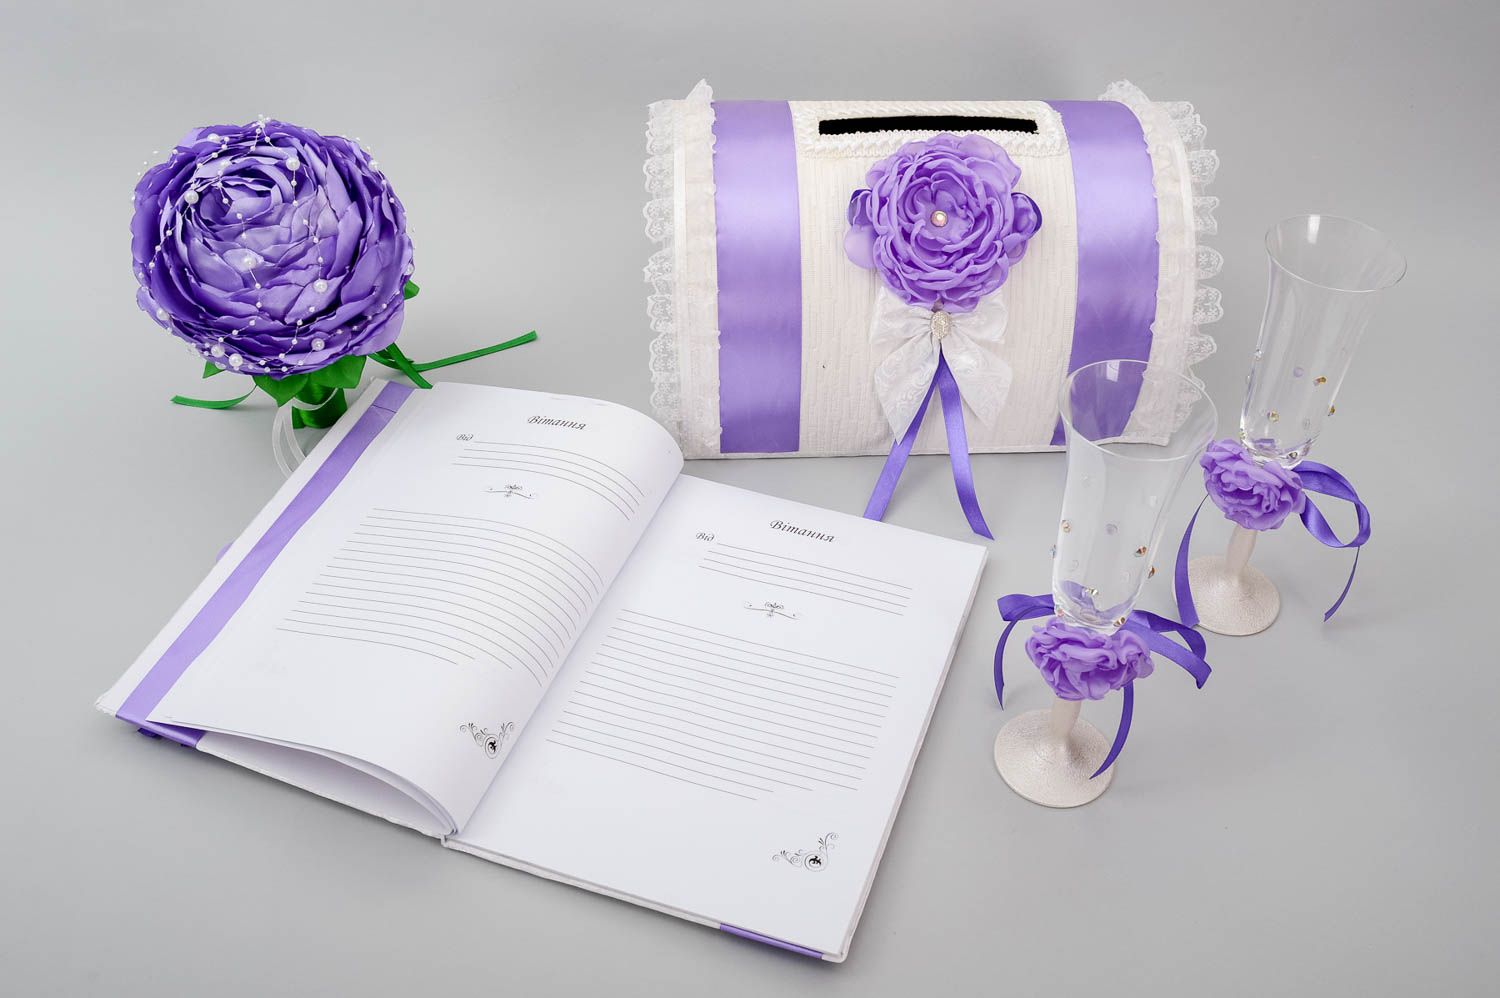 Handmade wedding accessories box for money book for wishes wedding bouquet photo 5